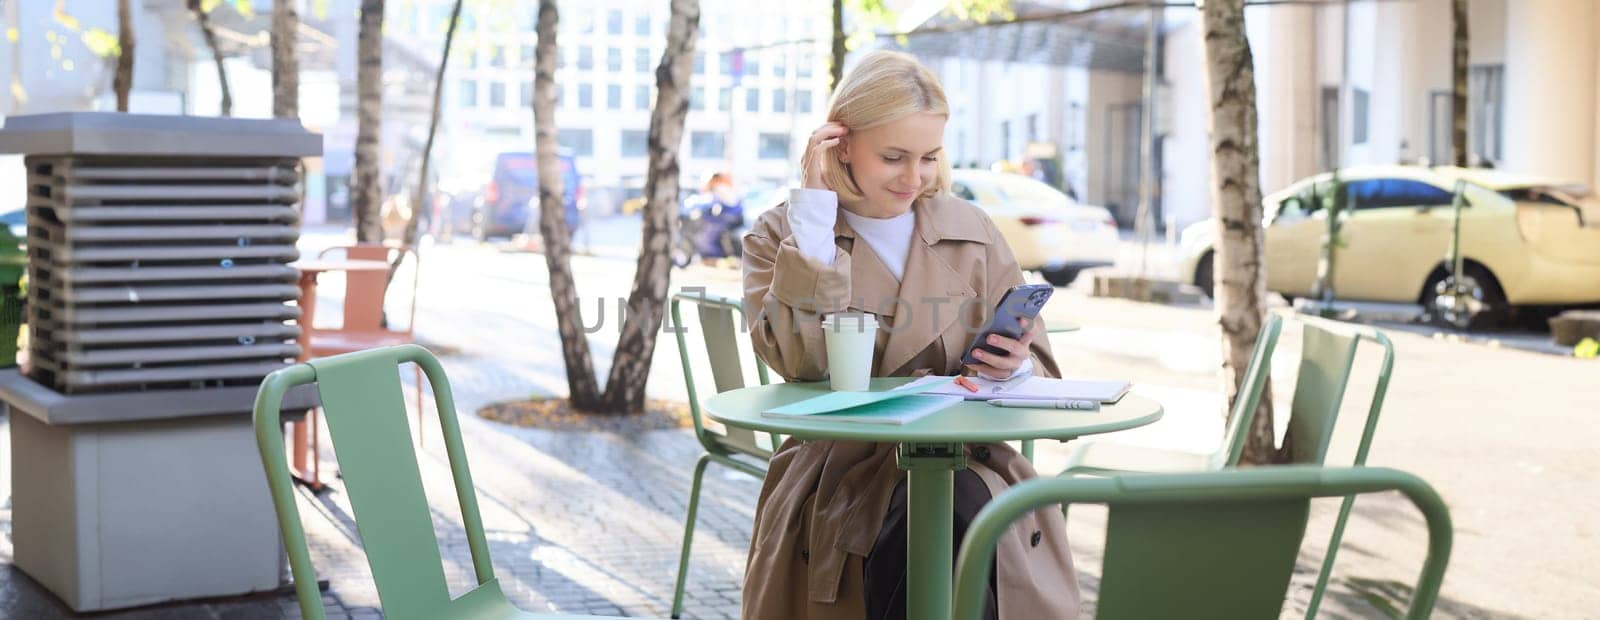 Street style portrait of young smiling woman sitting on street outdoors, holding mobile phone, using smartphone, drinking coffee in local cafe.